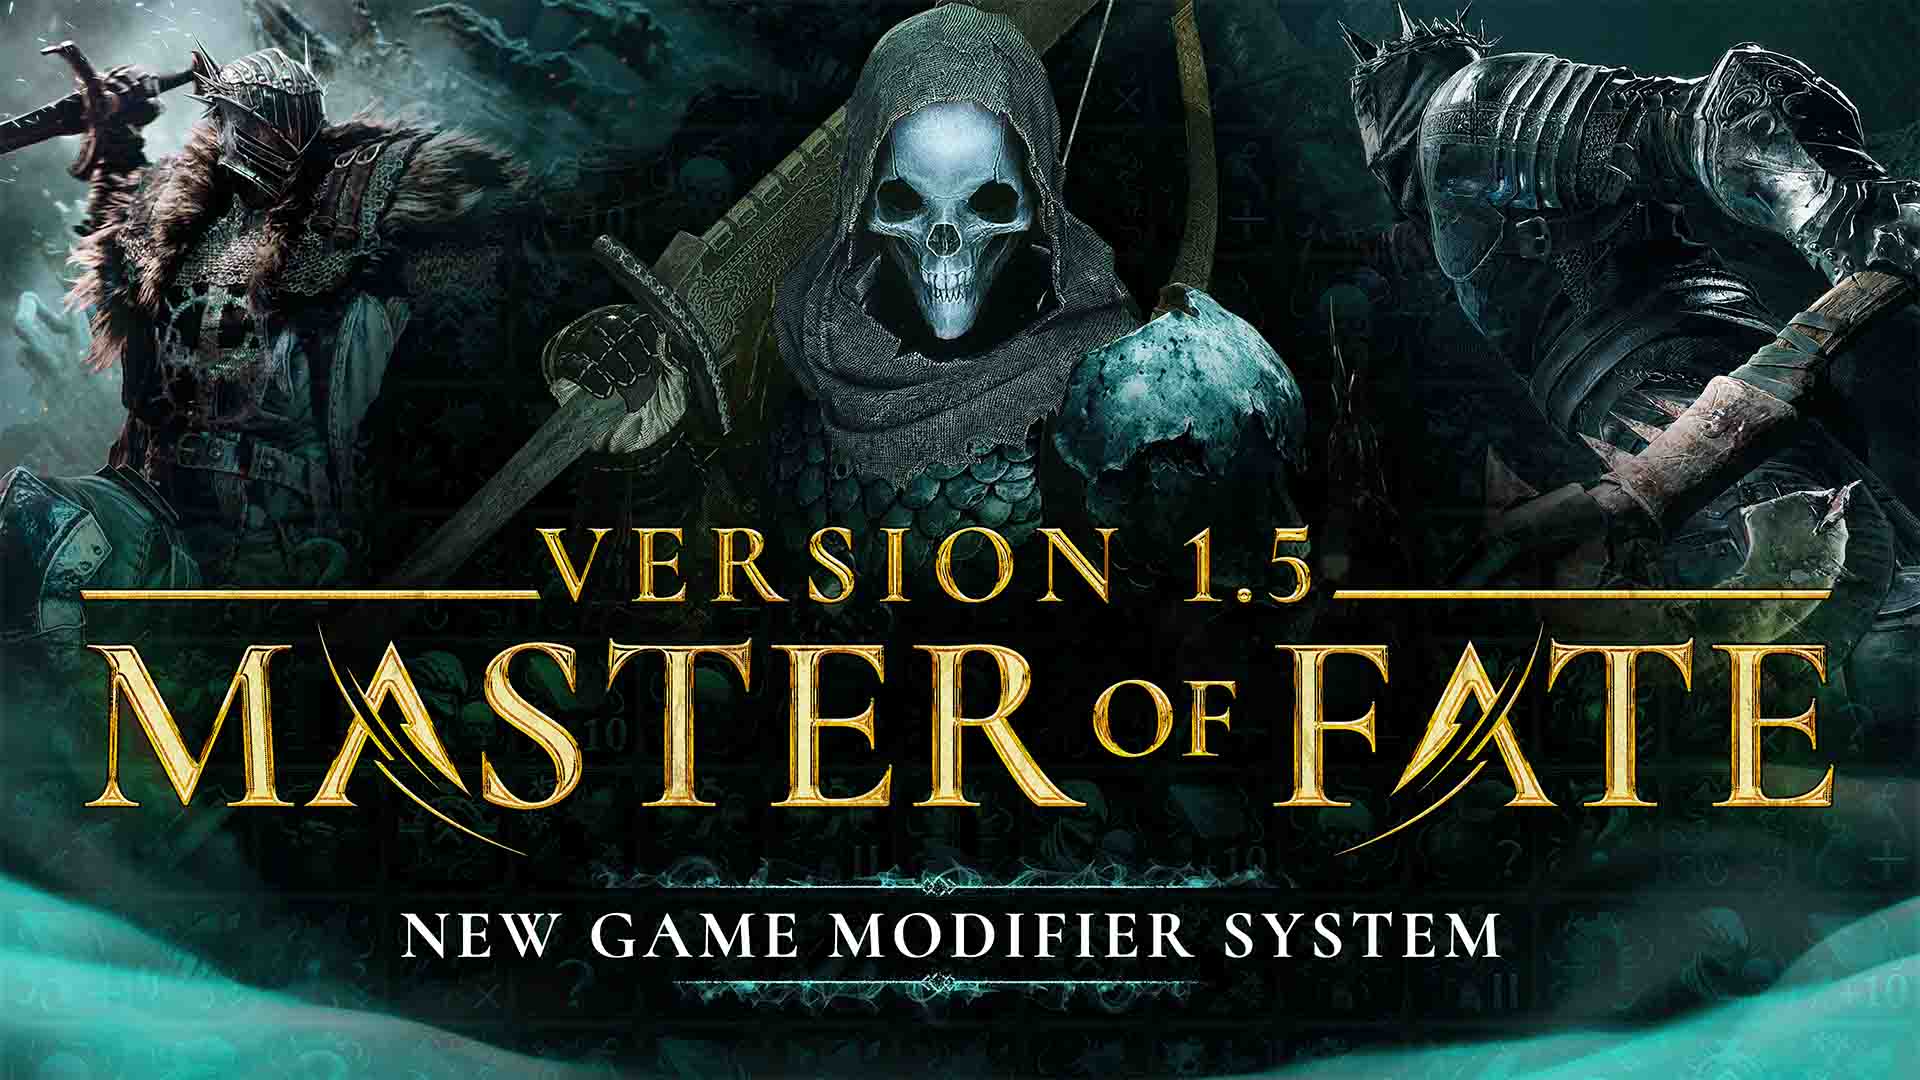 Lords Of The Fallen Adds Genre-Defining Advanced Game Modifier System With its ‘Master of Fate’ Update